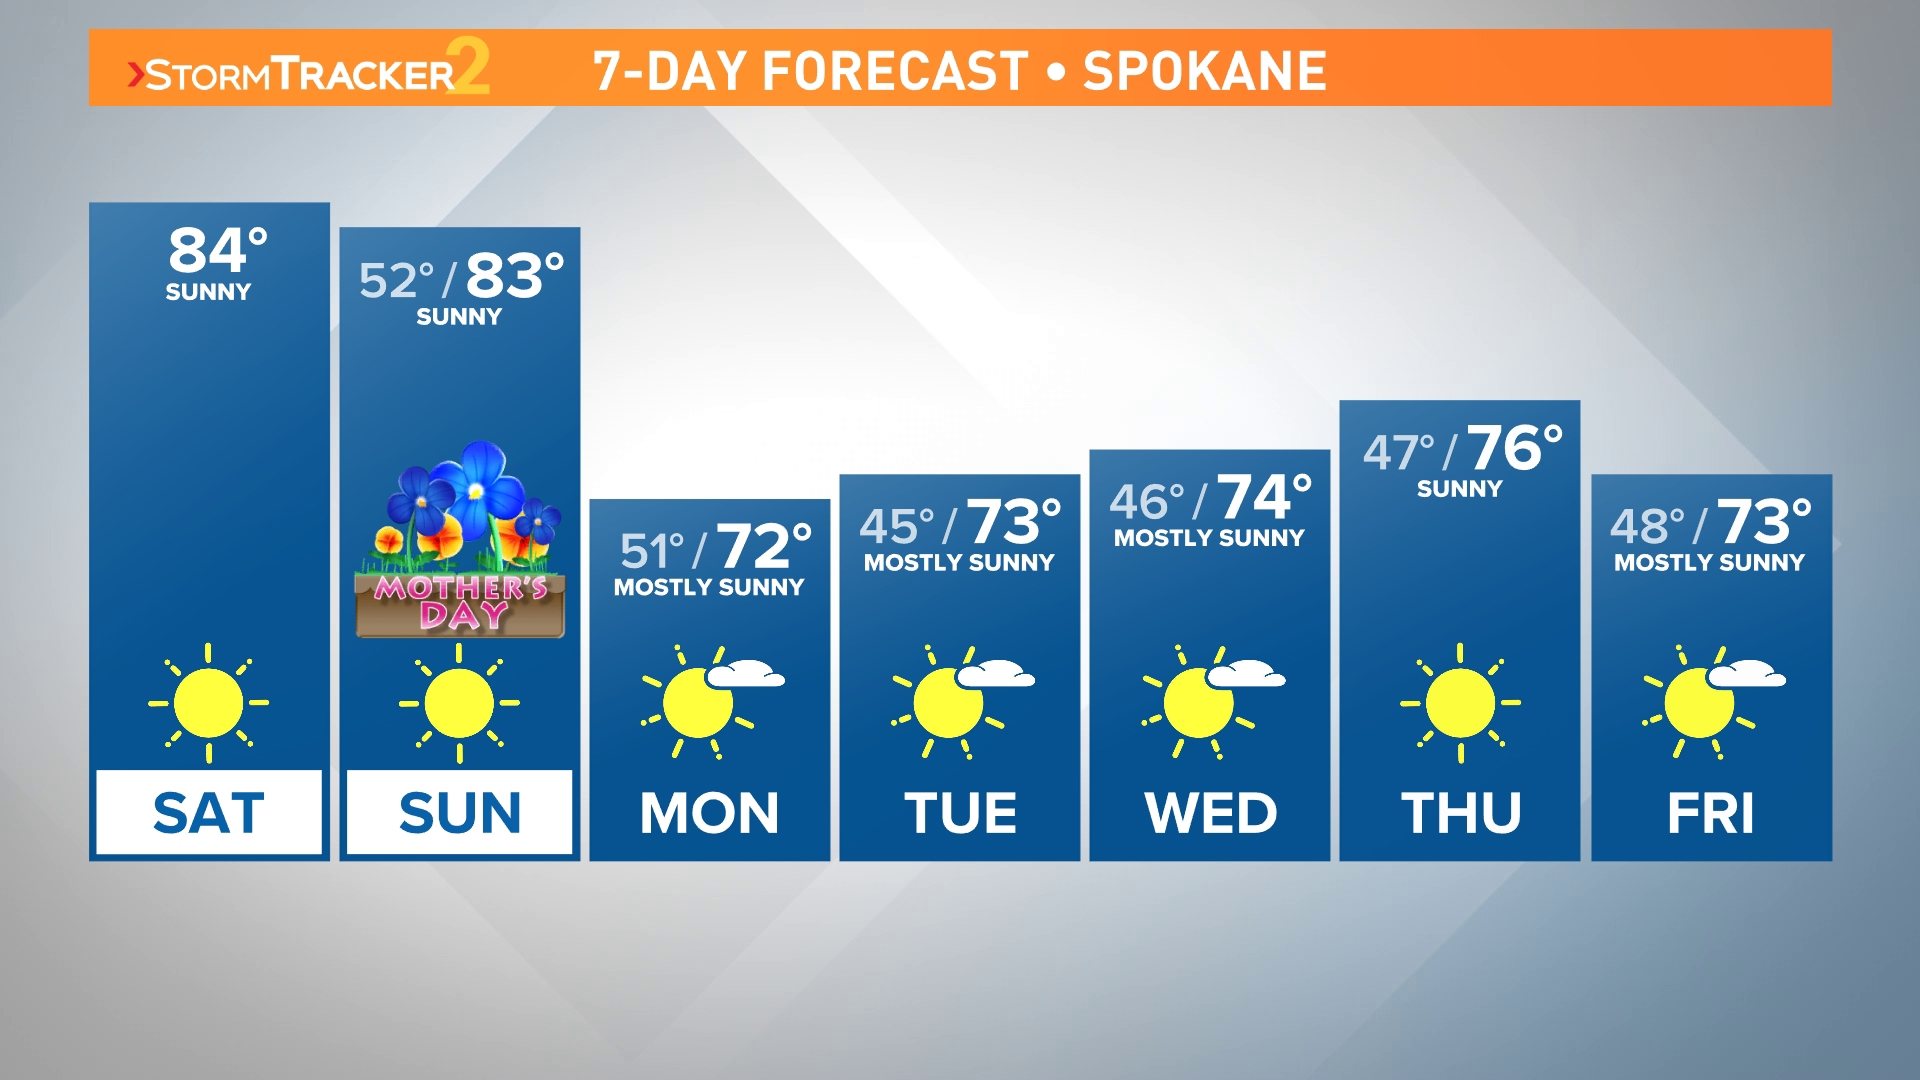 High temperatures will soar into the 80s across the Inland Northwest starting Friday and lasting through the weekend.